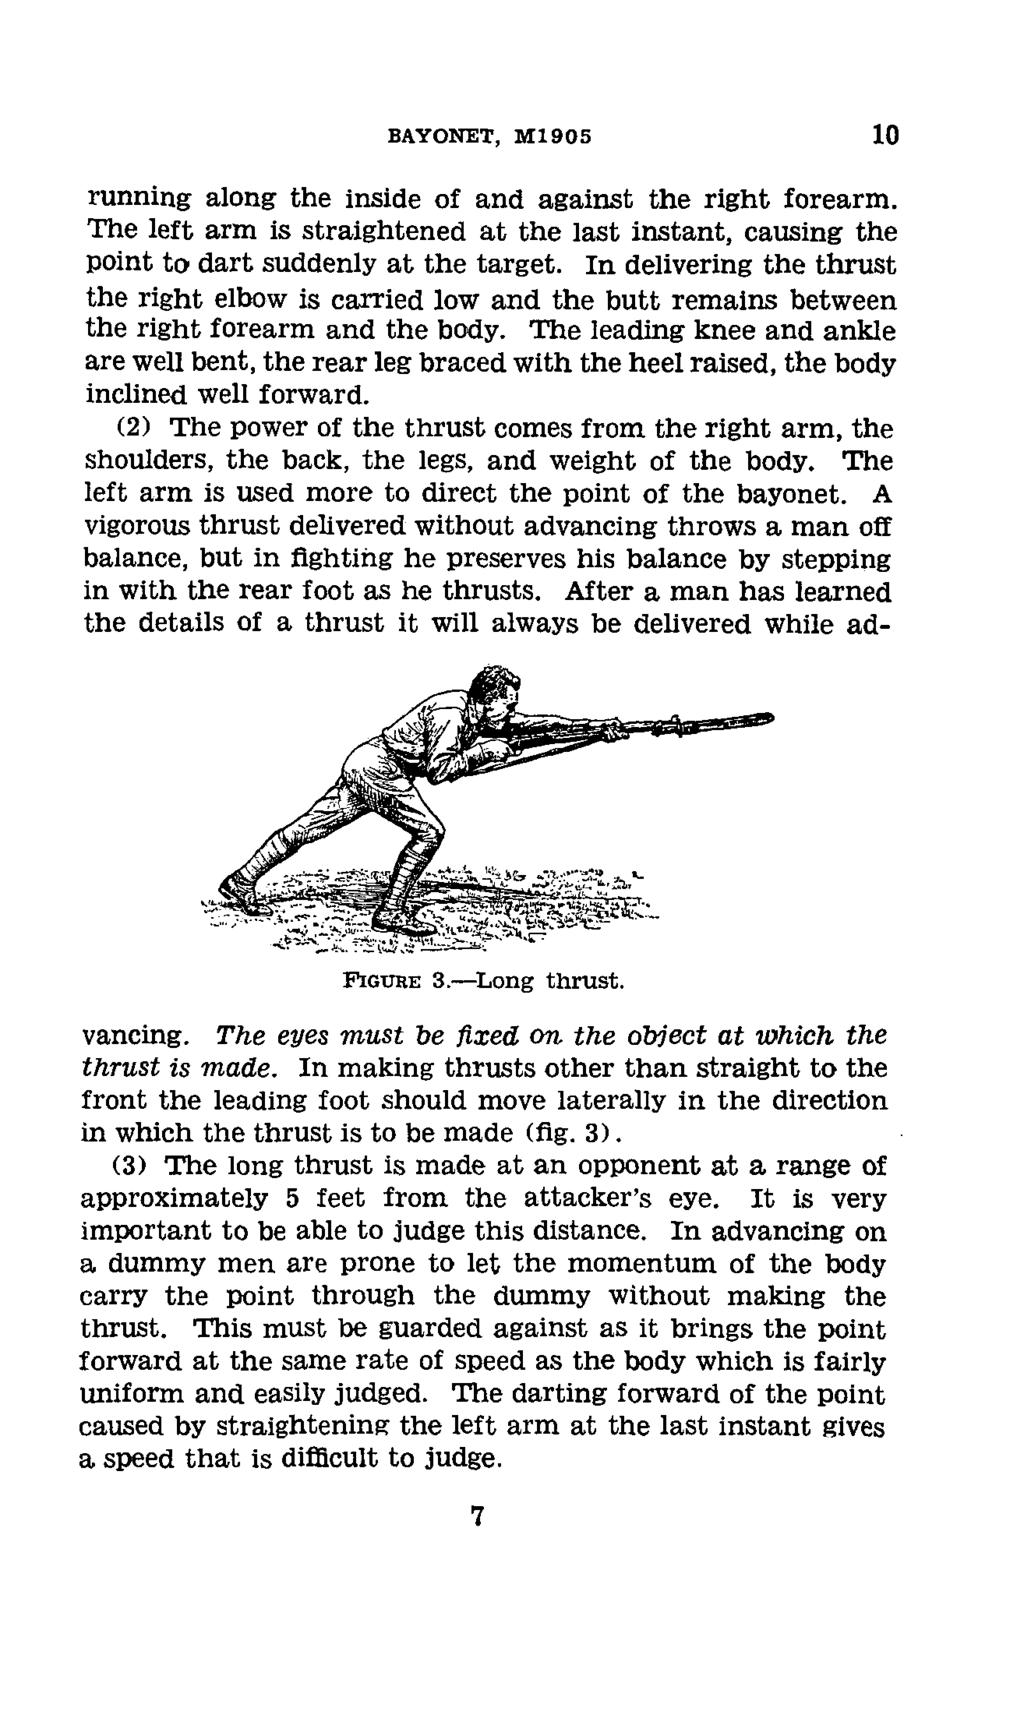 BAYONET, Ml 905 10 running along the inside of and against the right forearm. The left arm is straightened at the last instant, causing the point to dart suddenly at the target.